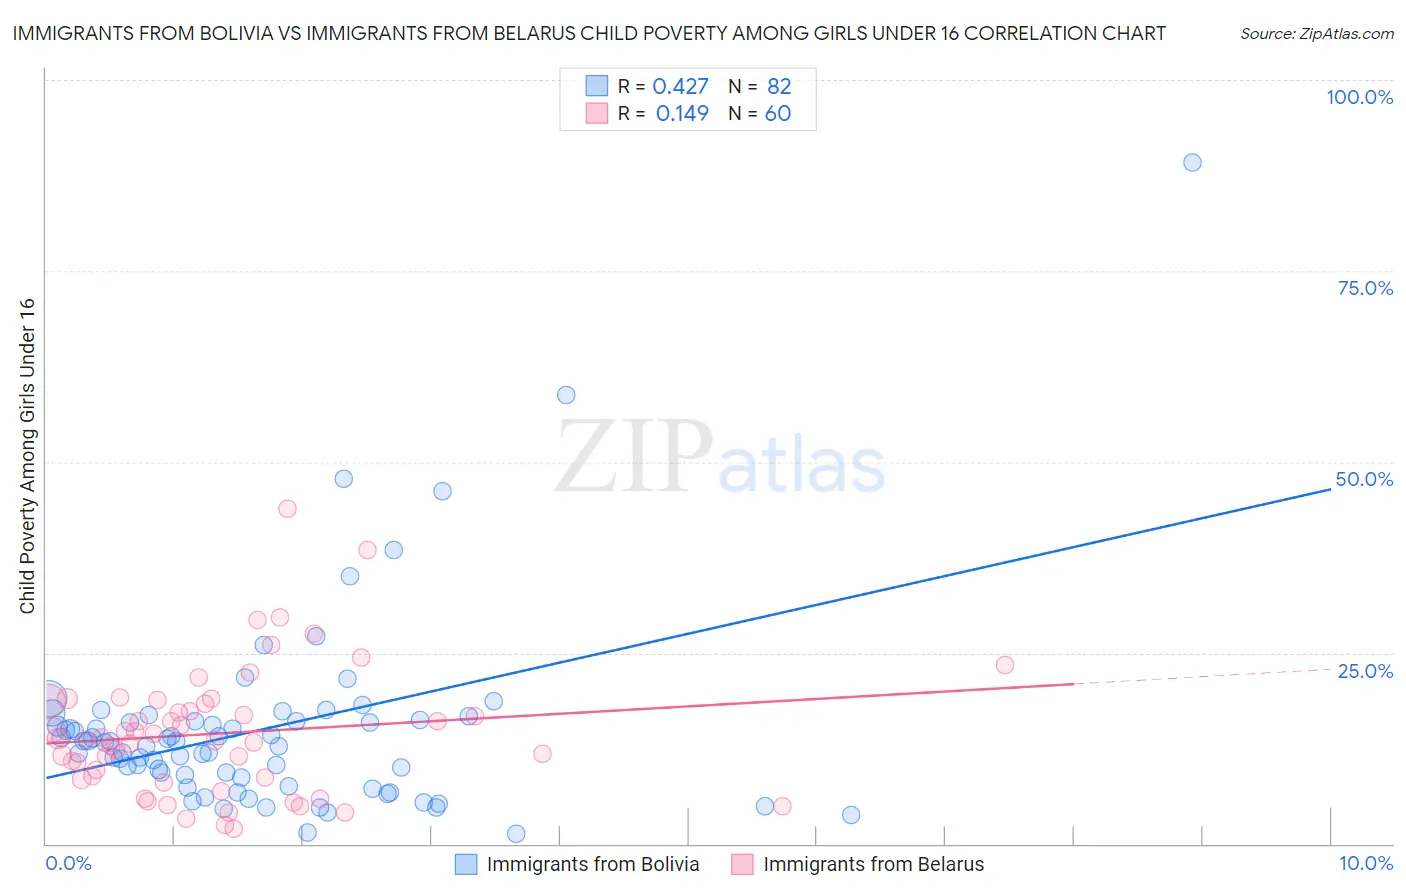 Immigrants from Bolivia vs Immigrants from Belarus Child Poverty Among Girls Under 16